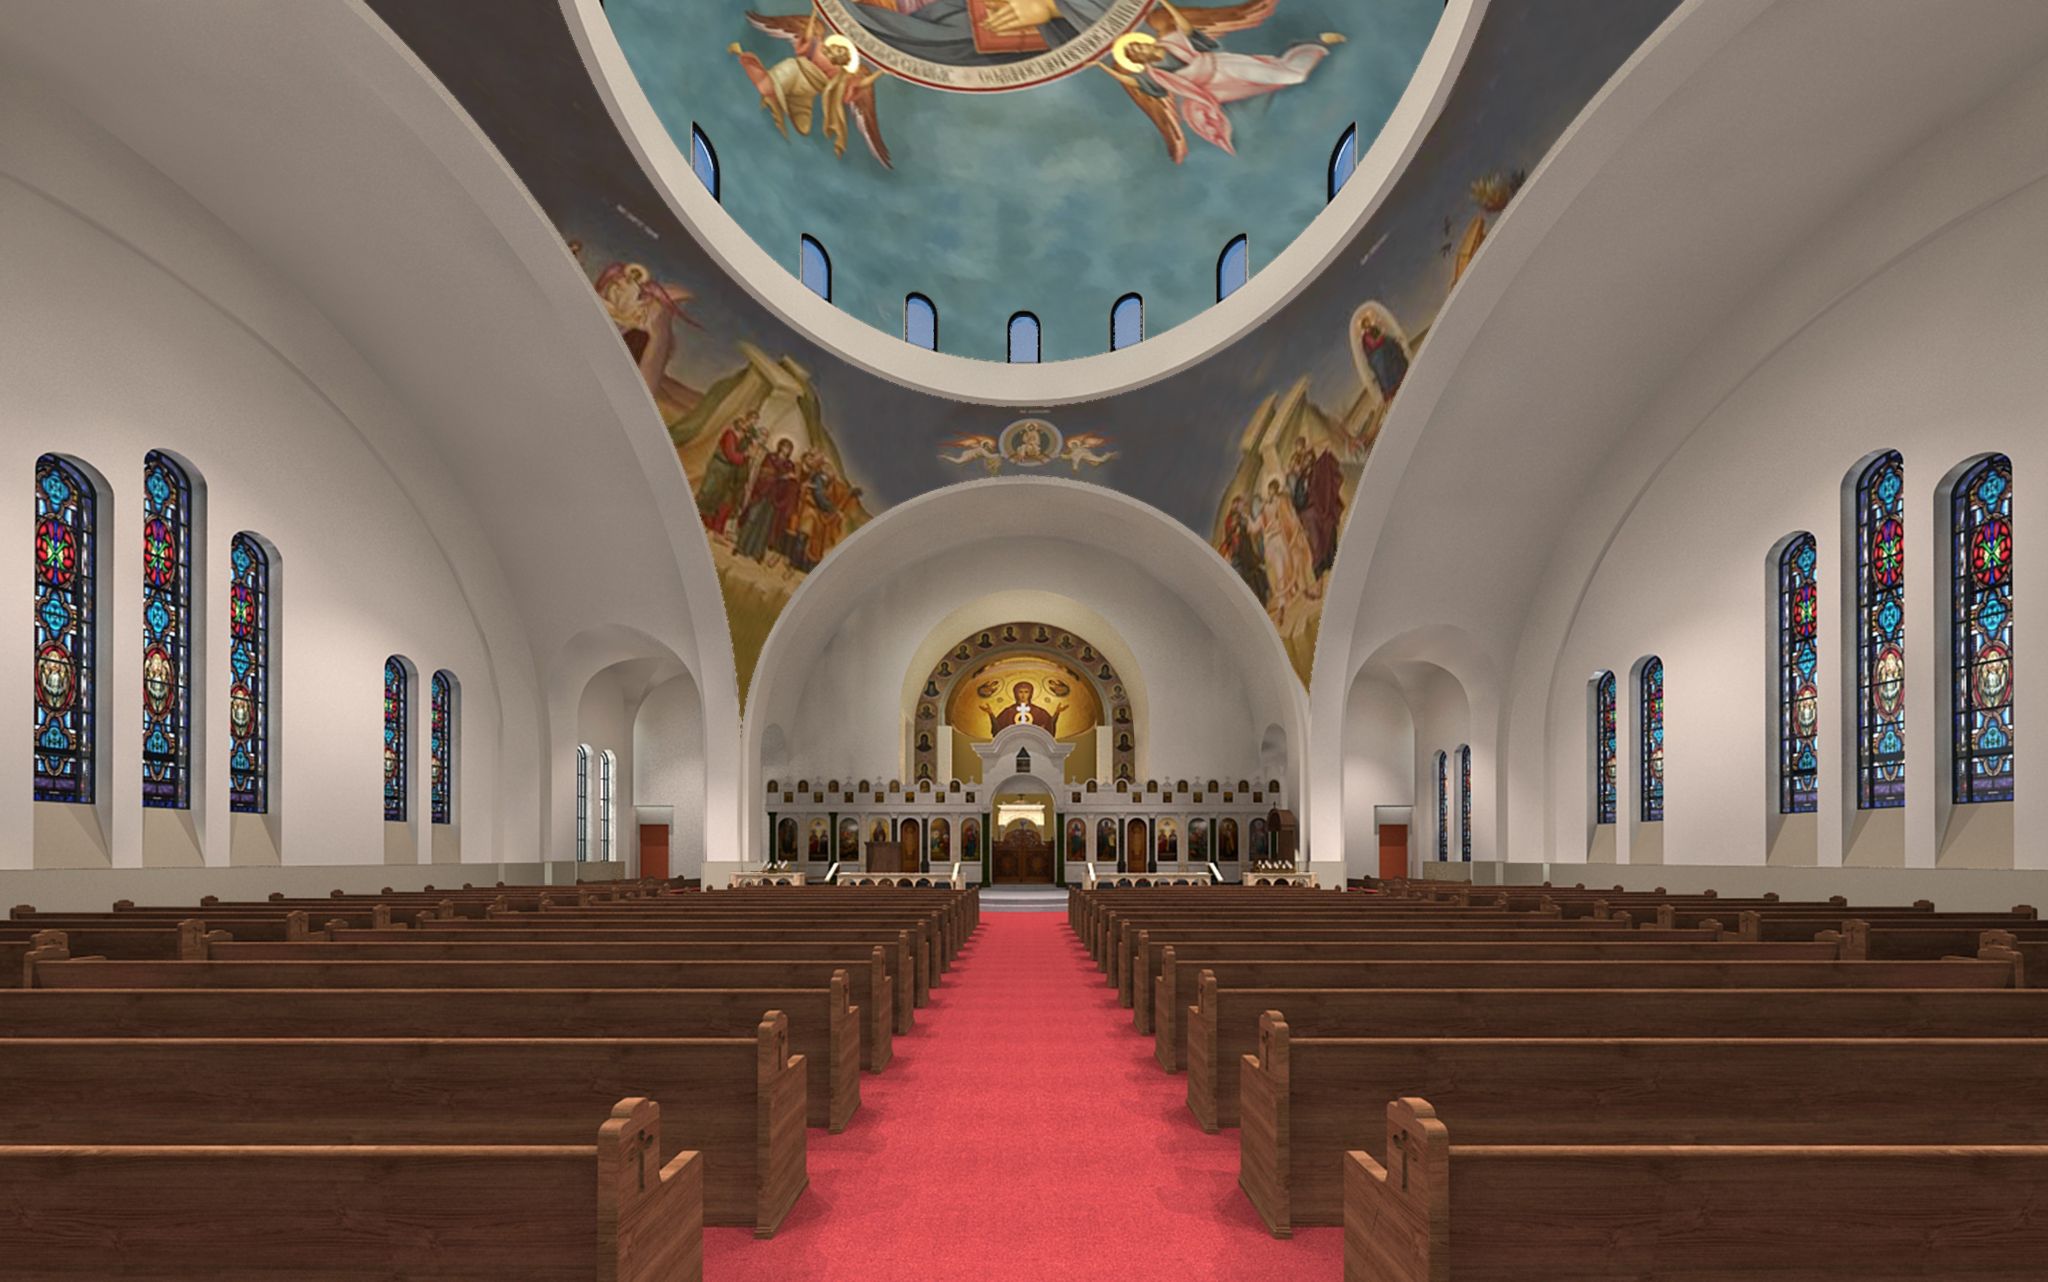 Annunciation Greek Orthodox Cathedral to undergo $12.5m expansion - Houston Chronicle2048 x 1282